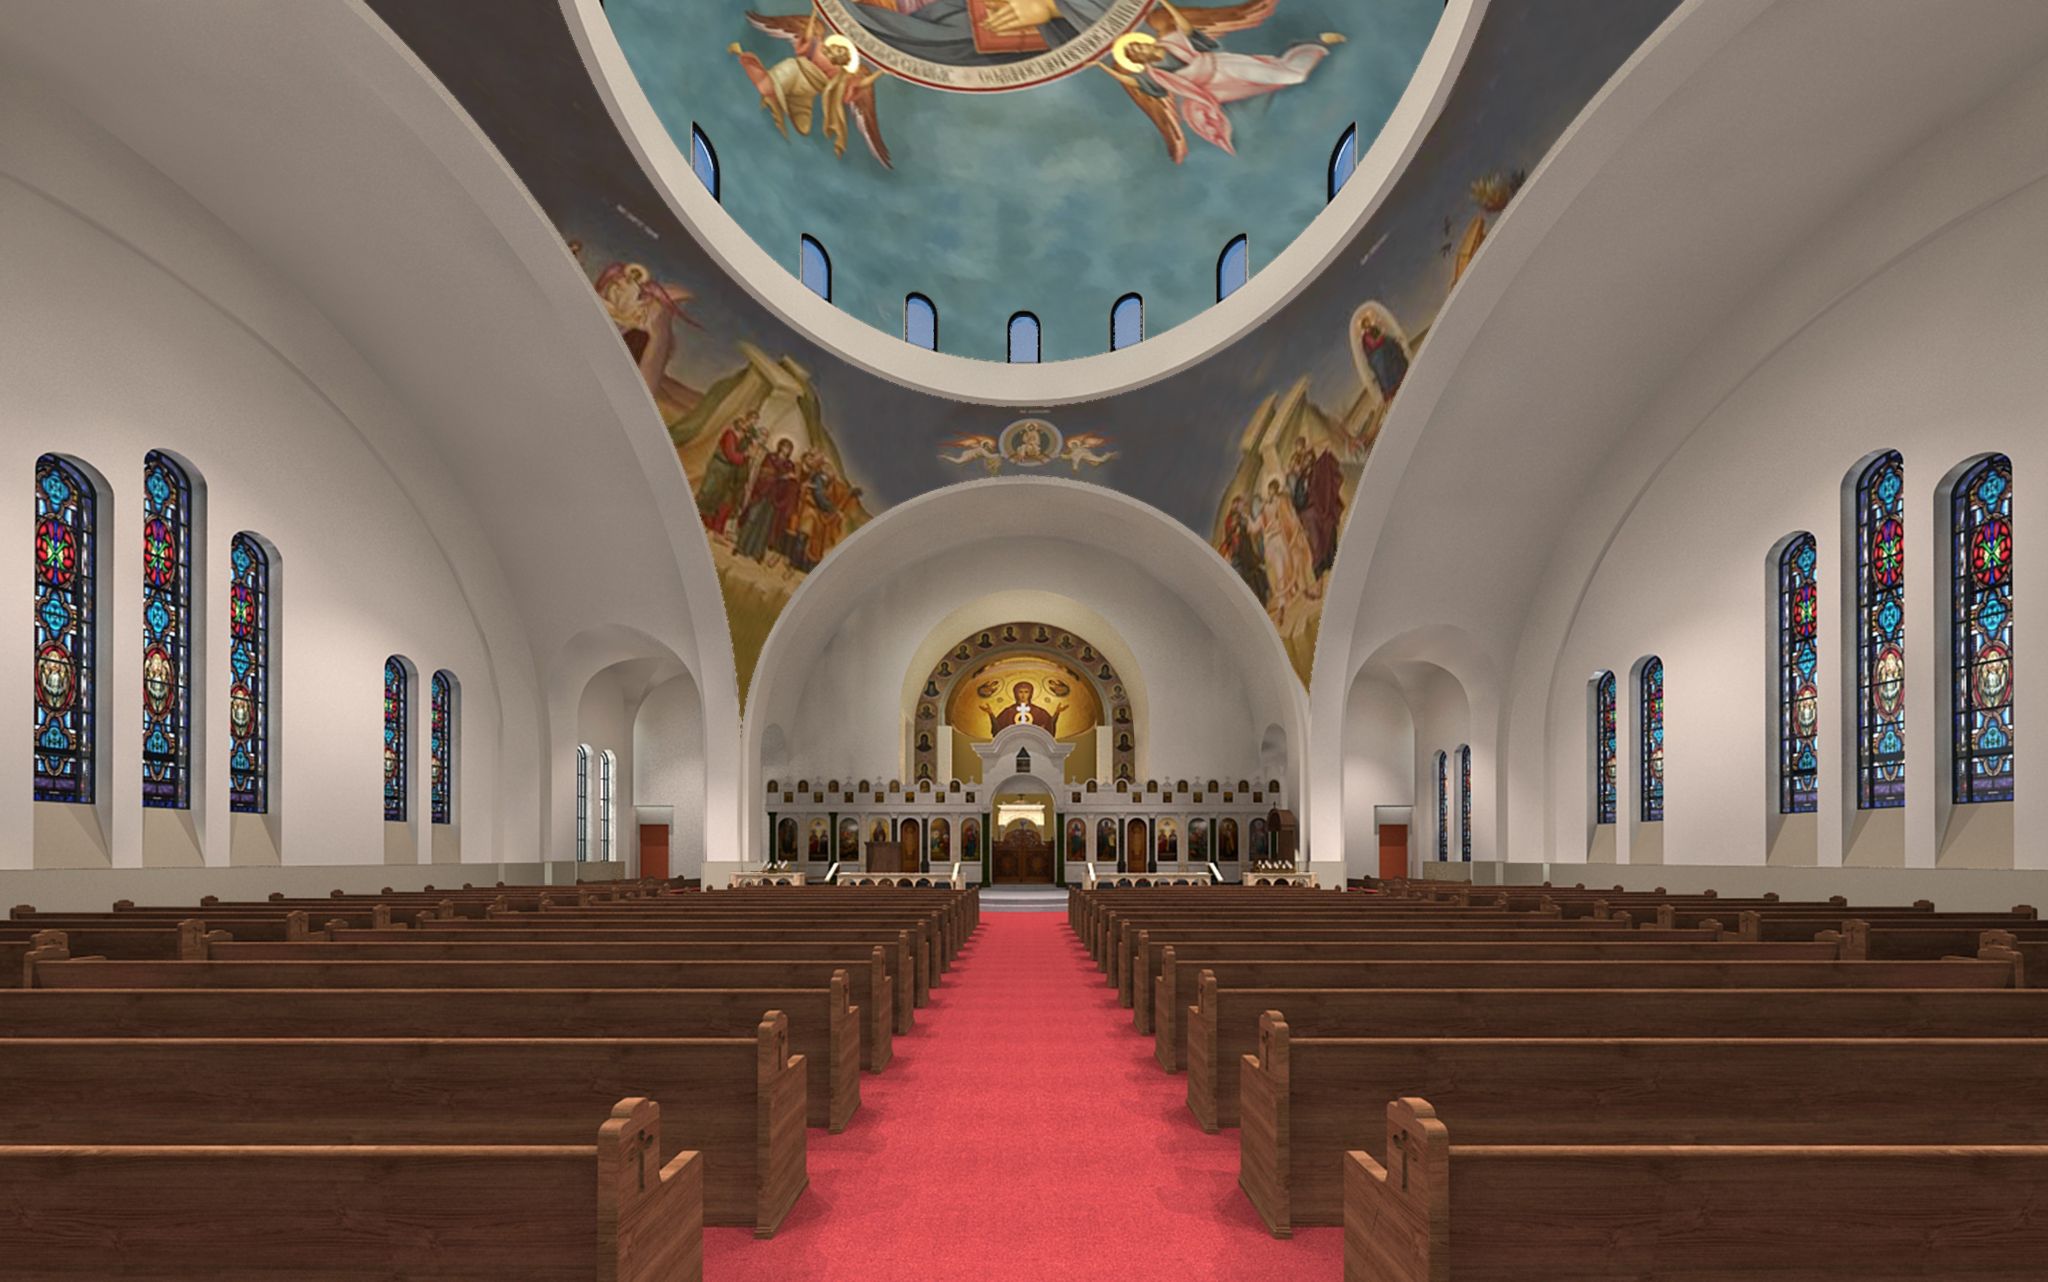 Annunciation Greek Orthodox Cathedral to undergo $12.5m expansion - Houston Chronicle2048 x 1282